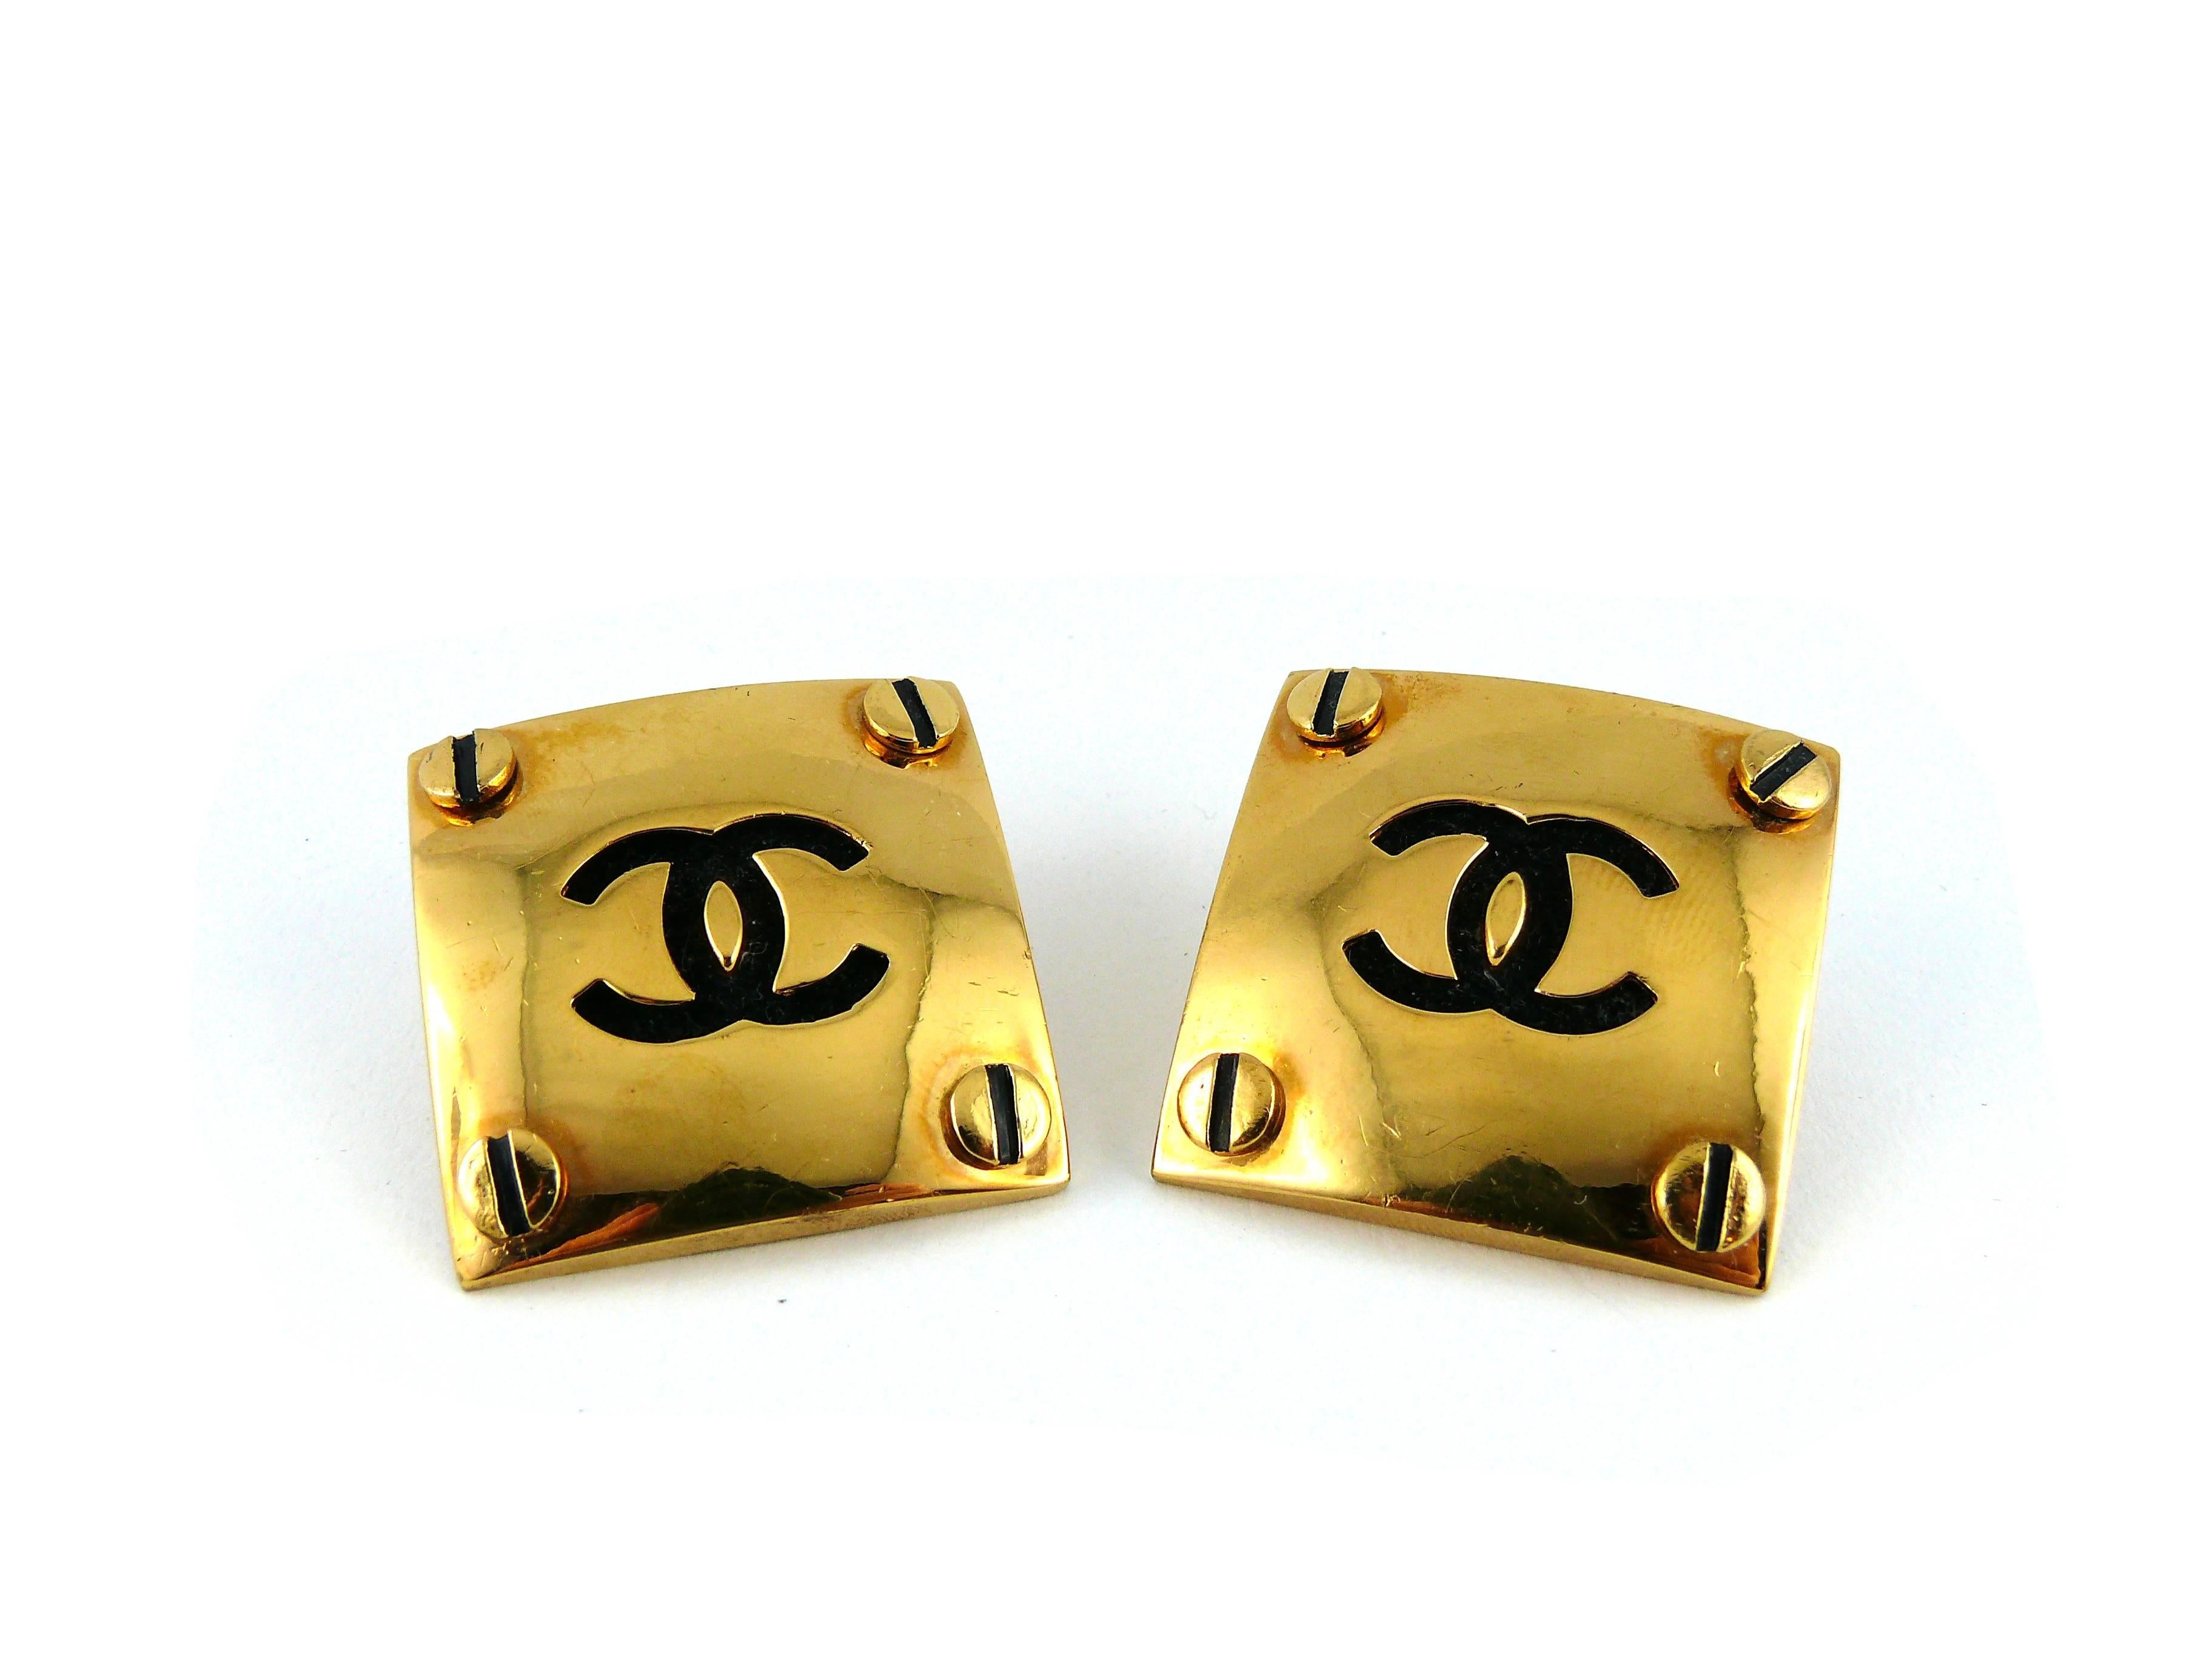 CHANEL vintage rare massive gold toned screw stud earrings featuring a black felt CC logo.

Collection year : 1994

Embossed CHANEL 2 9 Made in France.

Indicative measurements : width approx. 3.8 cm (1.50 inches) / length approx. 3.8 cm (1.50